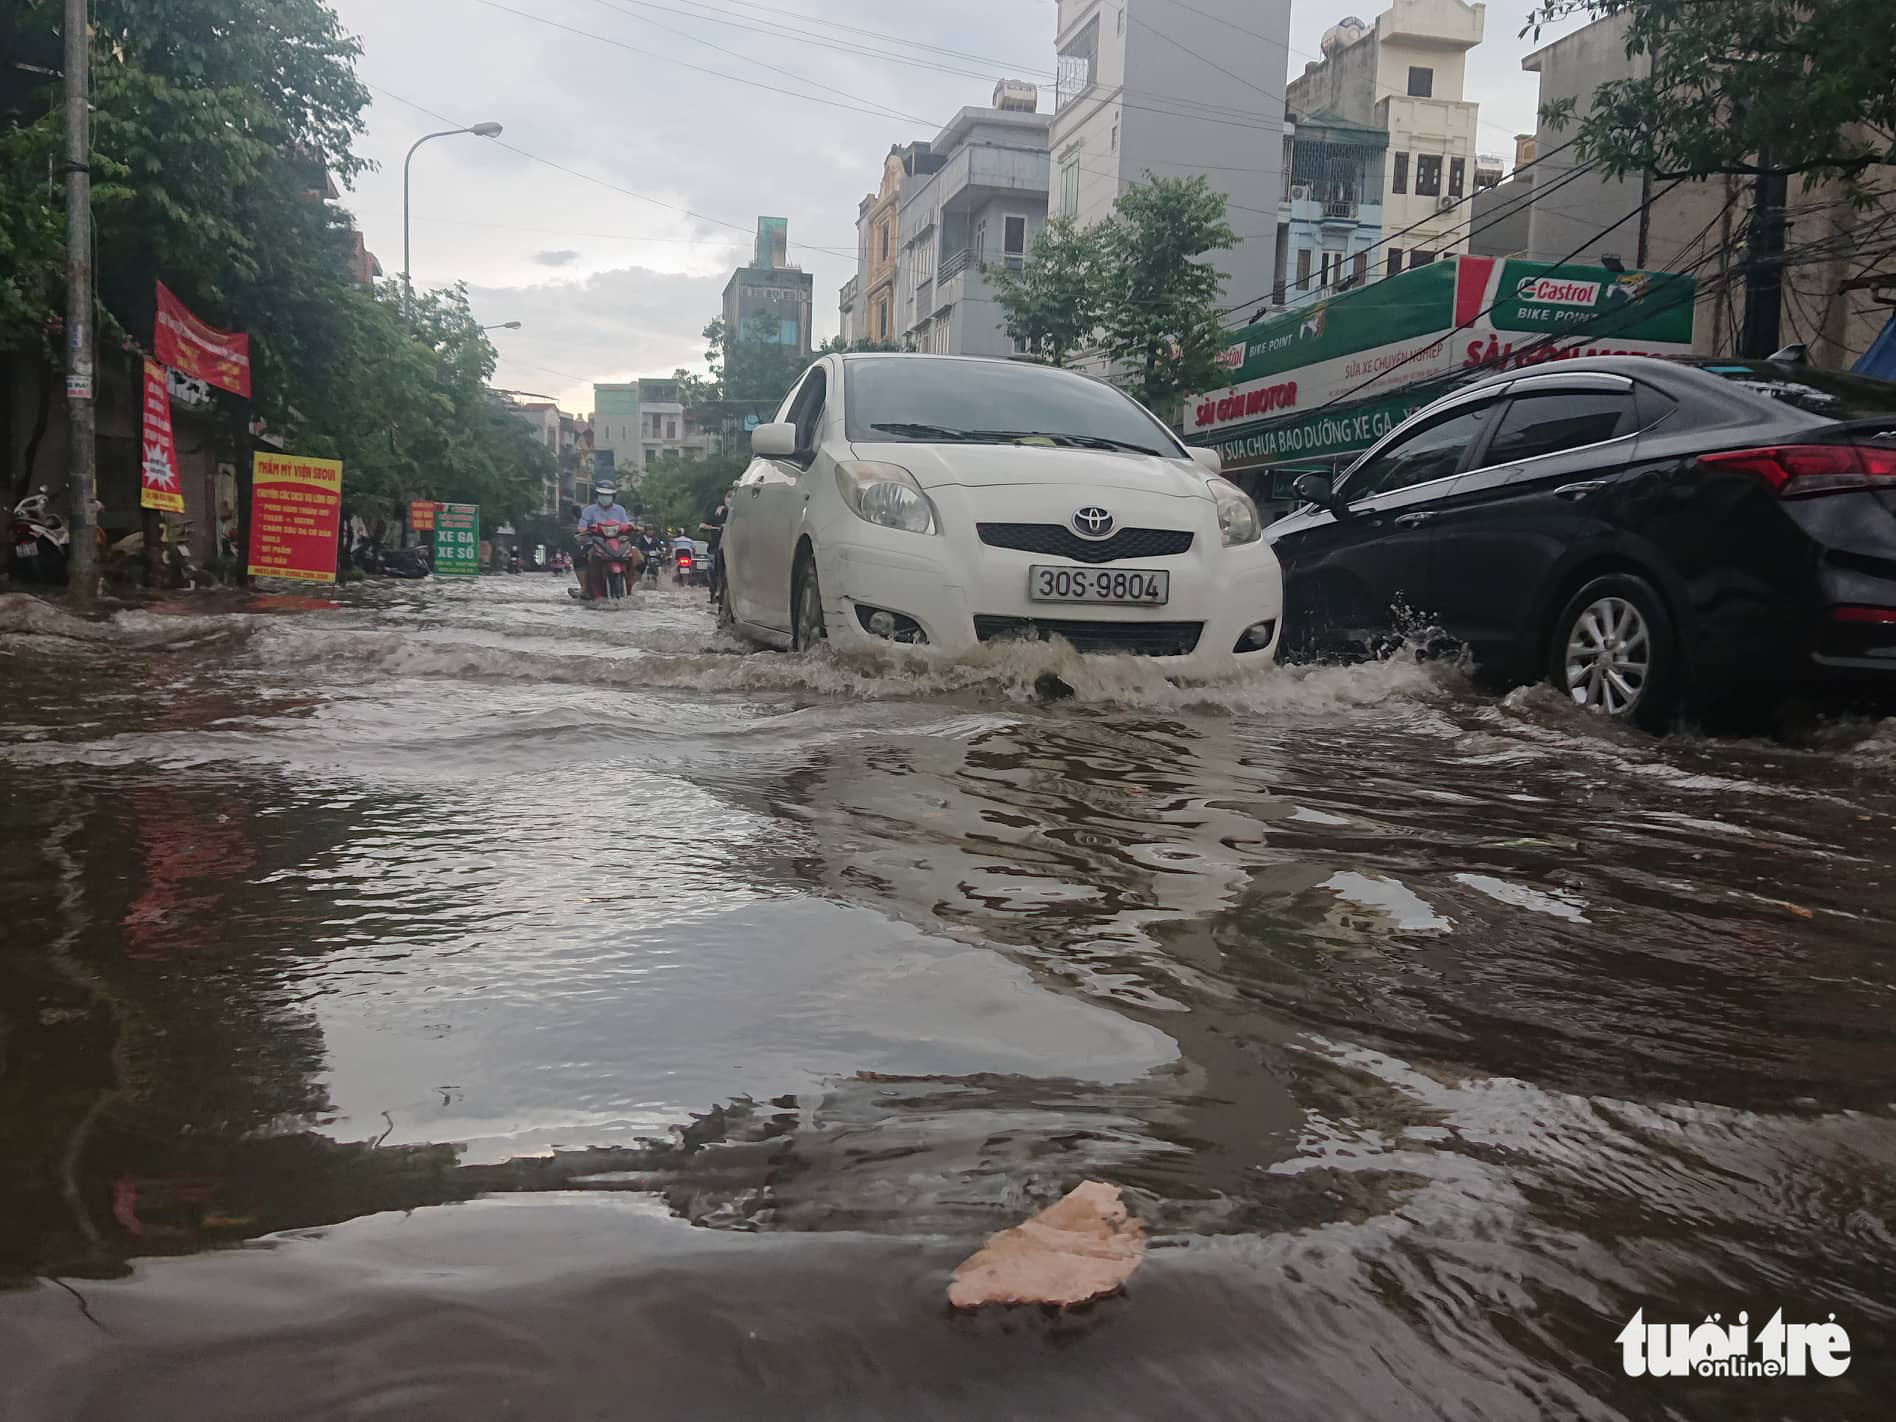 Van Quan Street in Ha Dong District, Hanoi is inundated, May 29, 2022. Photo: Duong Lieu / Tuoi Tre